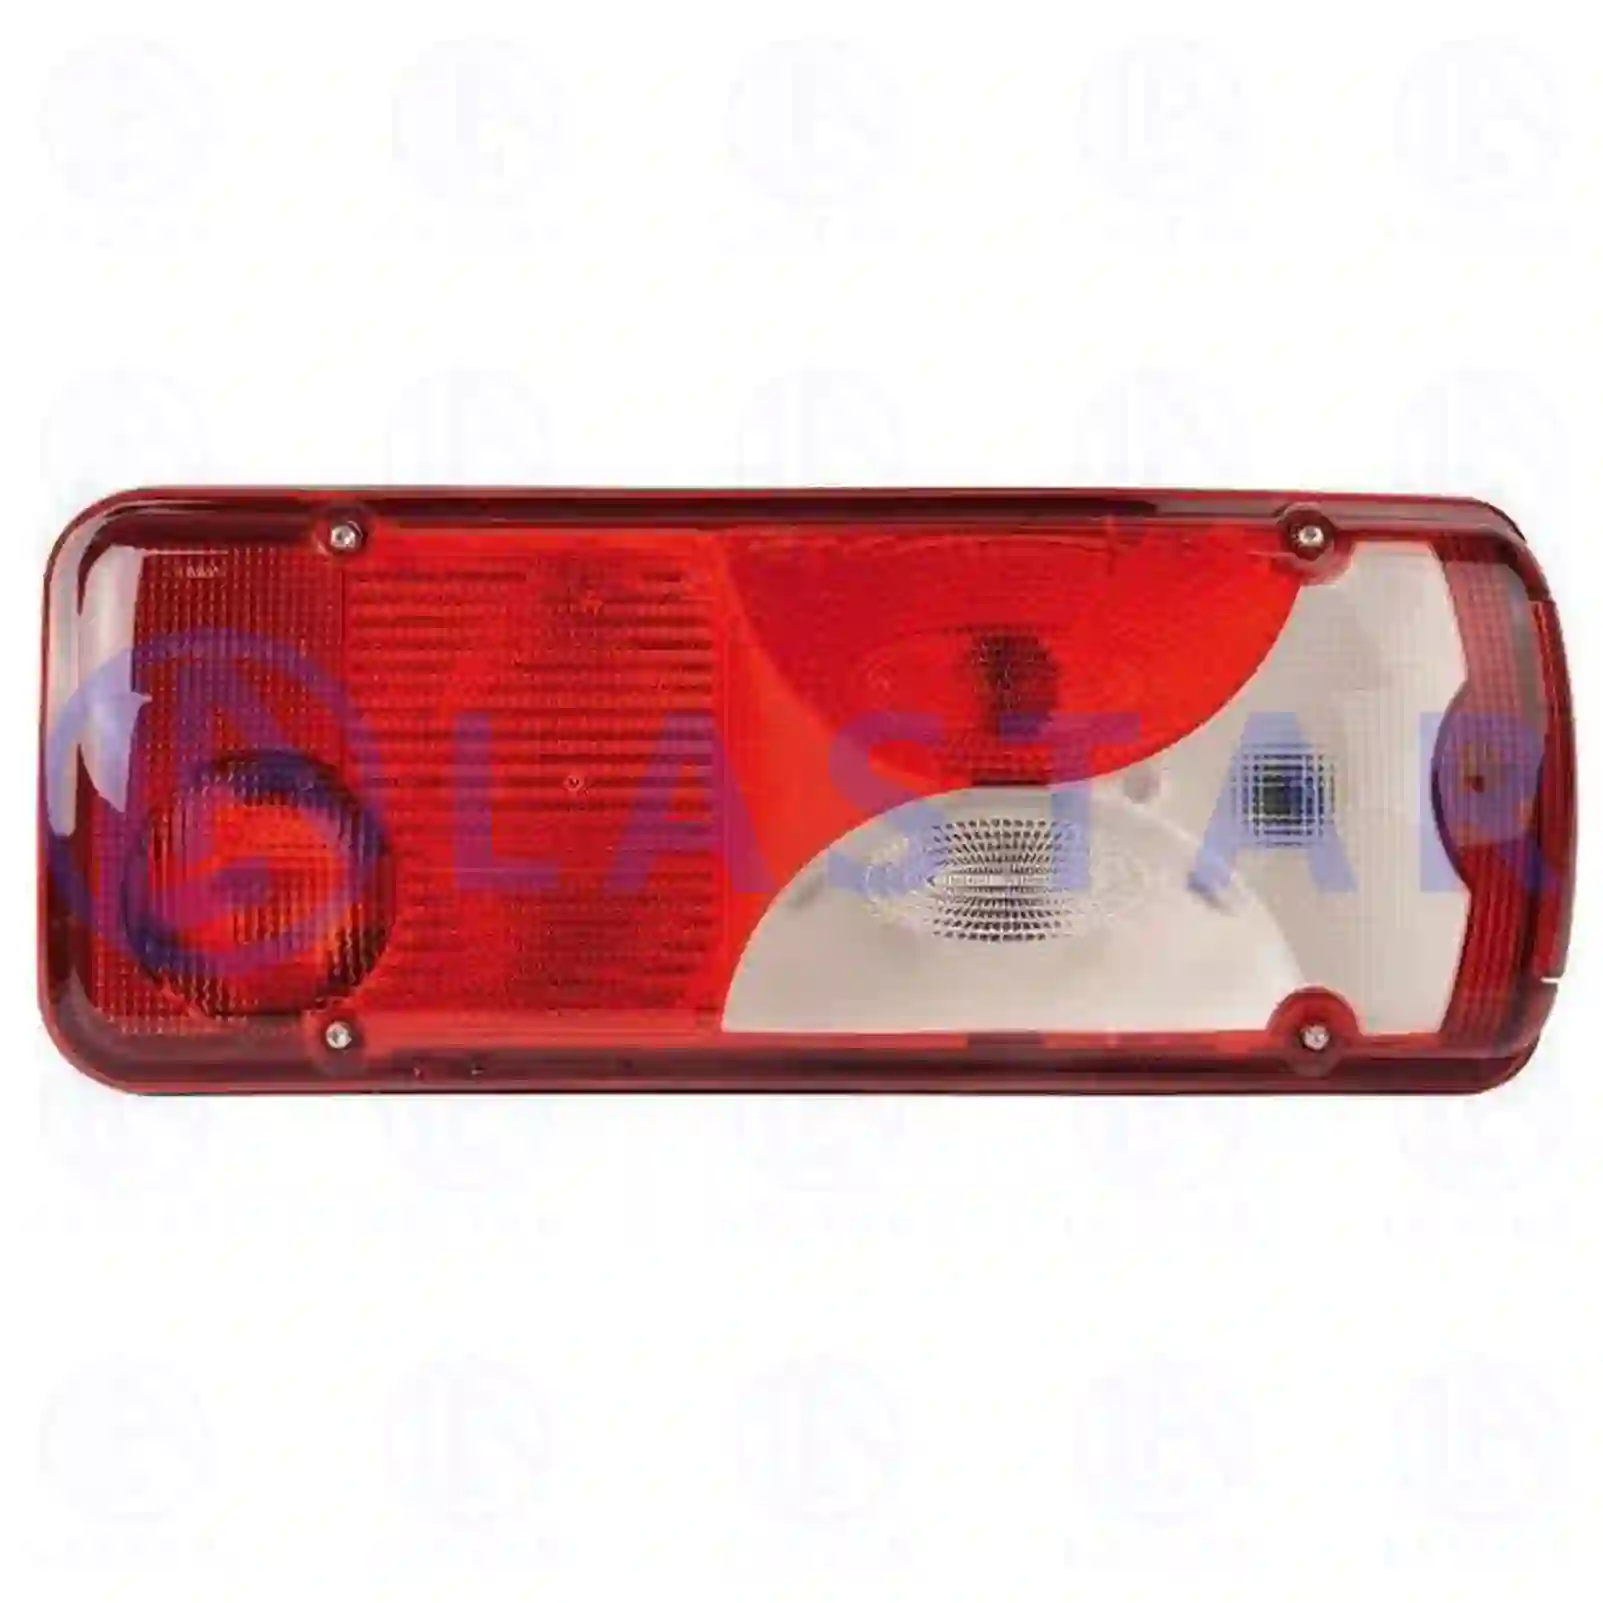 Tail lamp, right, 77712006, #YOK ||  77712006 Lastar Spare Part | Truck Spare Parts, Auotomotive Spare Parts Tail lamp, right, 77712006, #YOK ||  77712006 Lastar Spare Part | Truck Spare Parts, Auotomotive Spare Parts